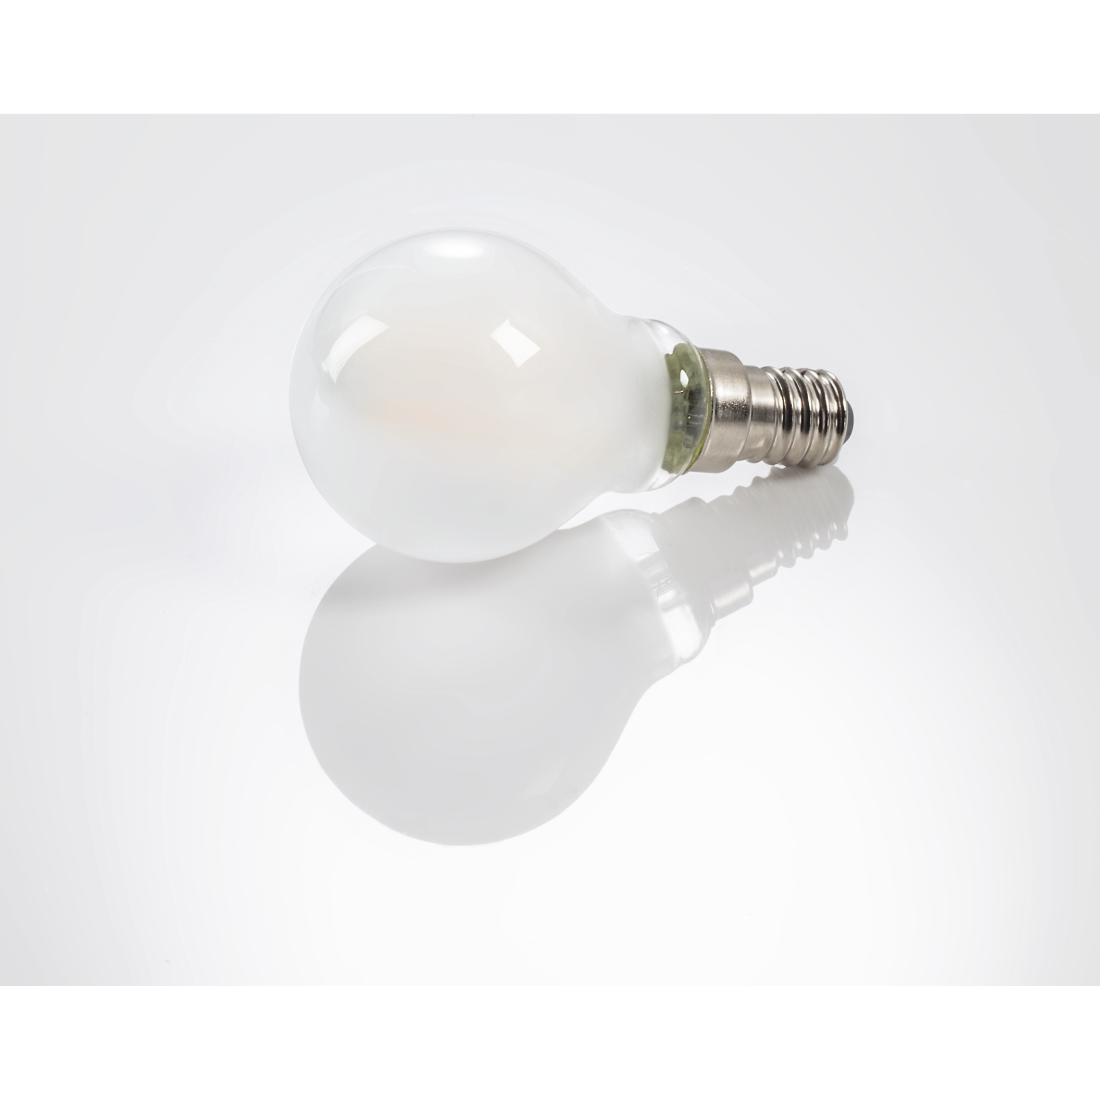 abx3 High-Res Image 3 - Xavax, LED Filament, E14, 250 lm Replaces 25 W, Drop Bulb, warm white